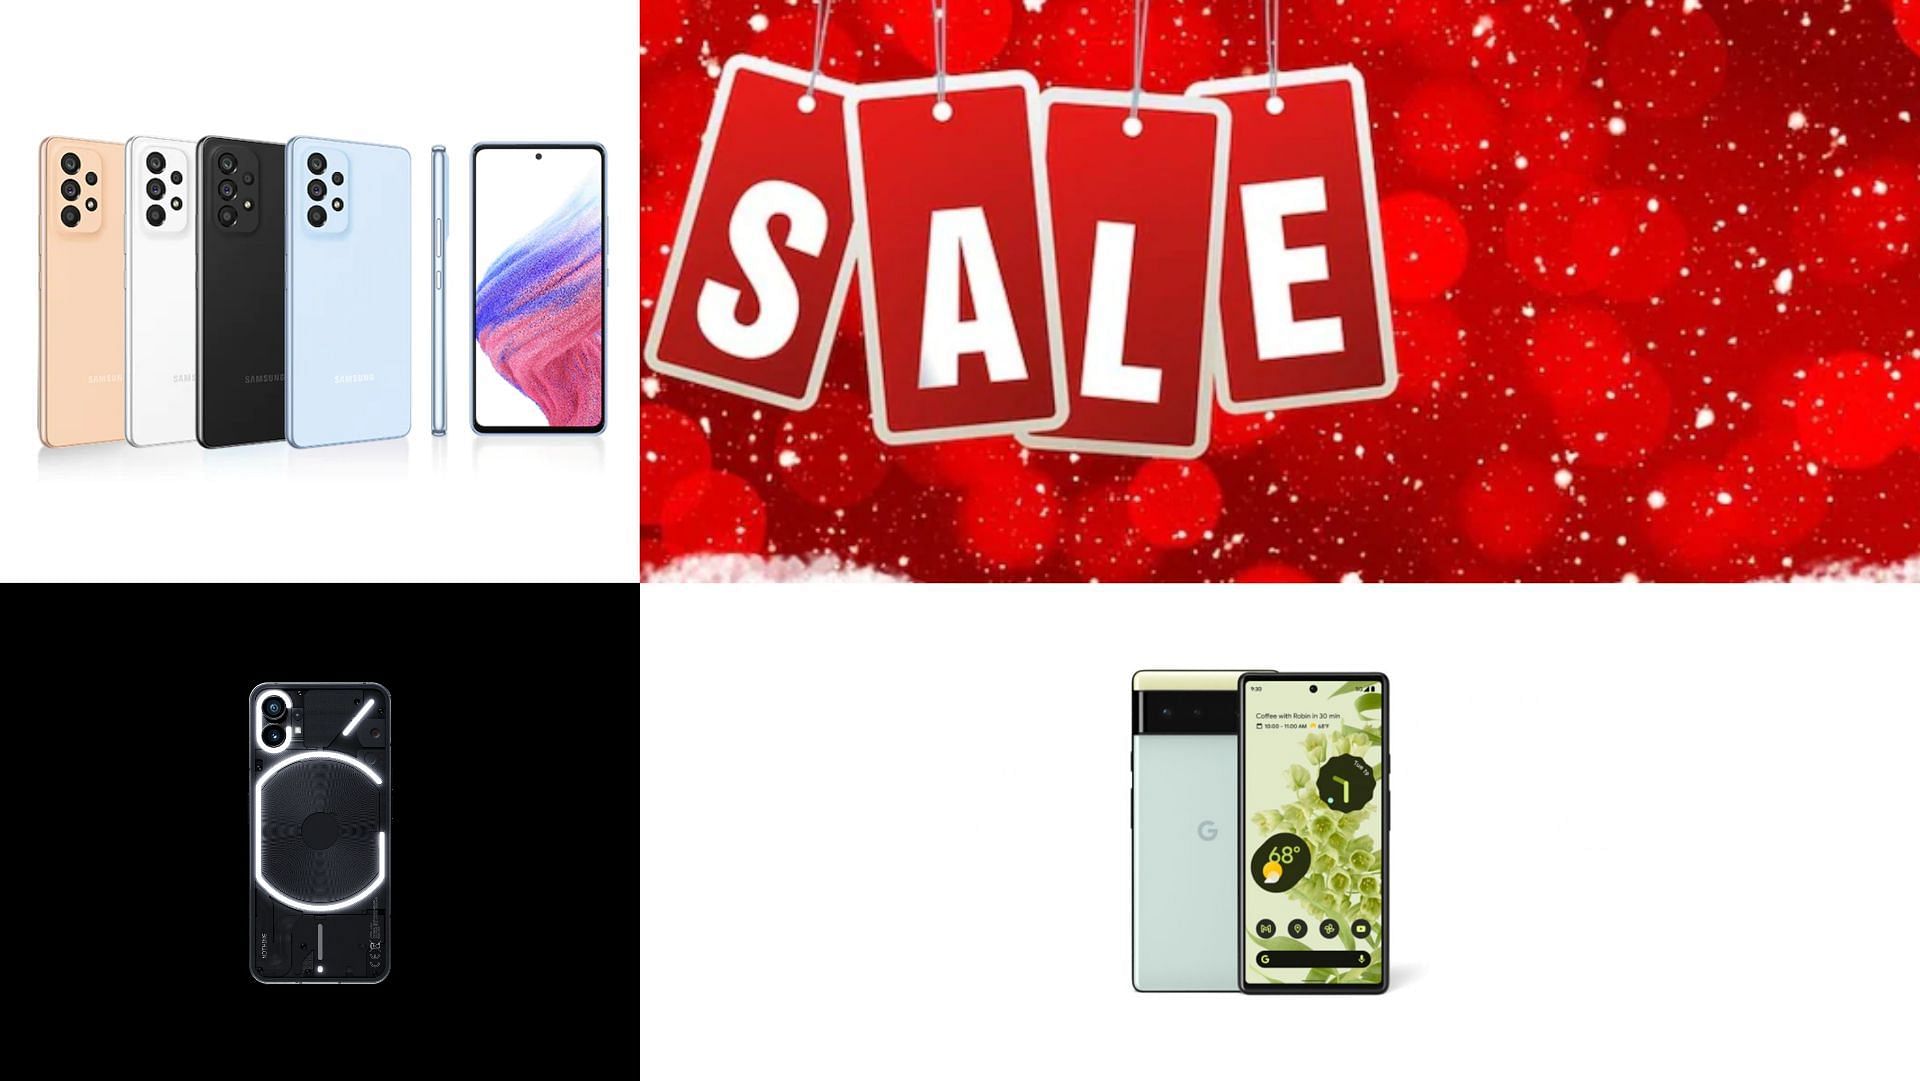 Battle of mid-range phones for holiday sale (image by Nothing, Samsung and Google)